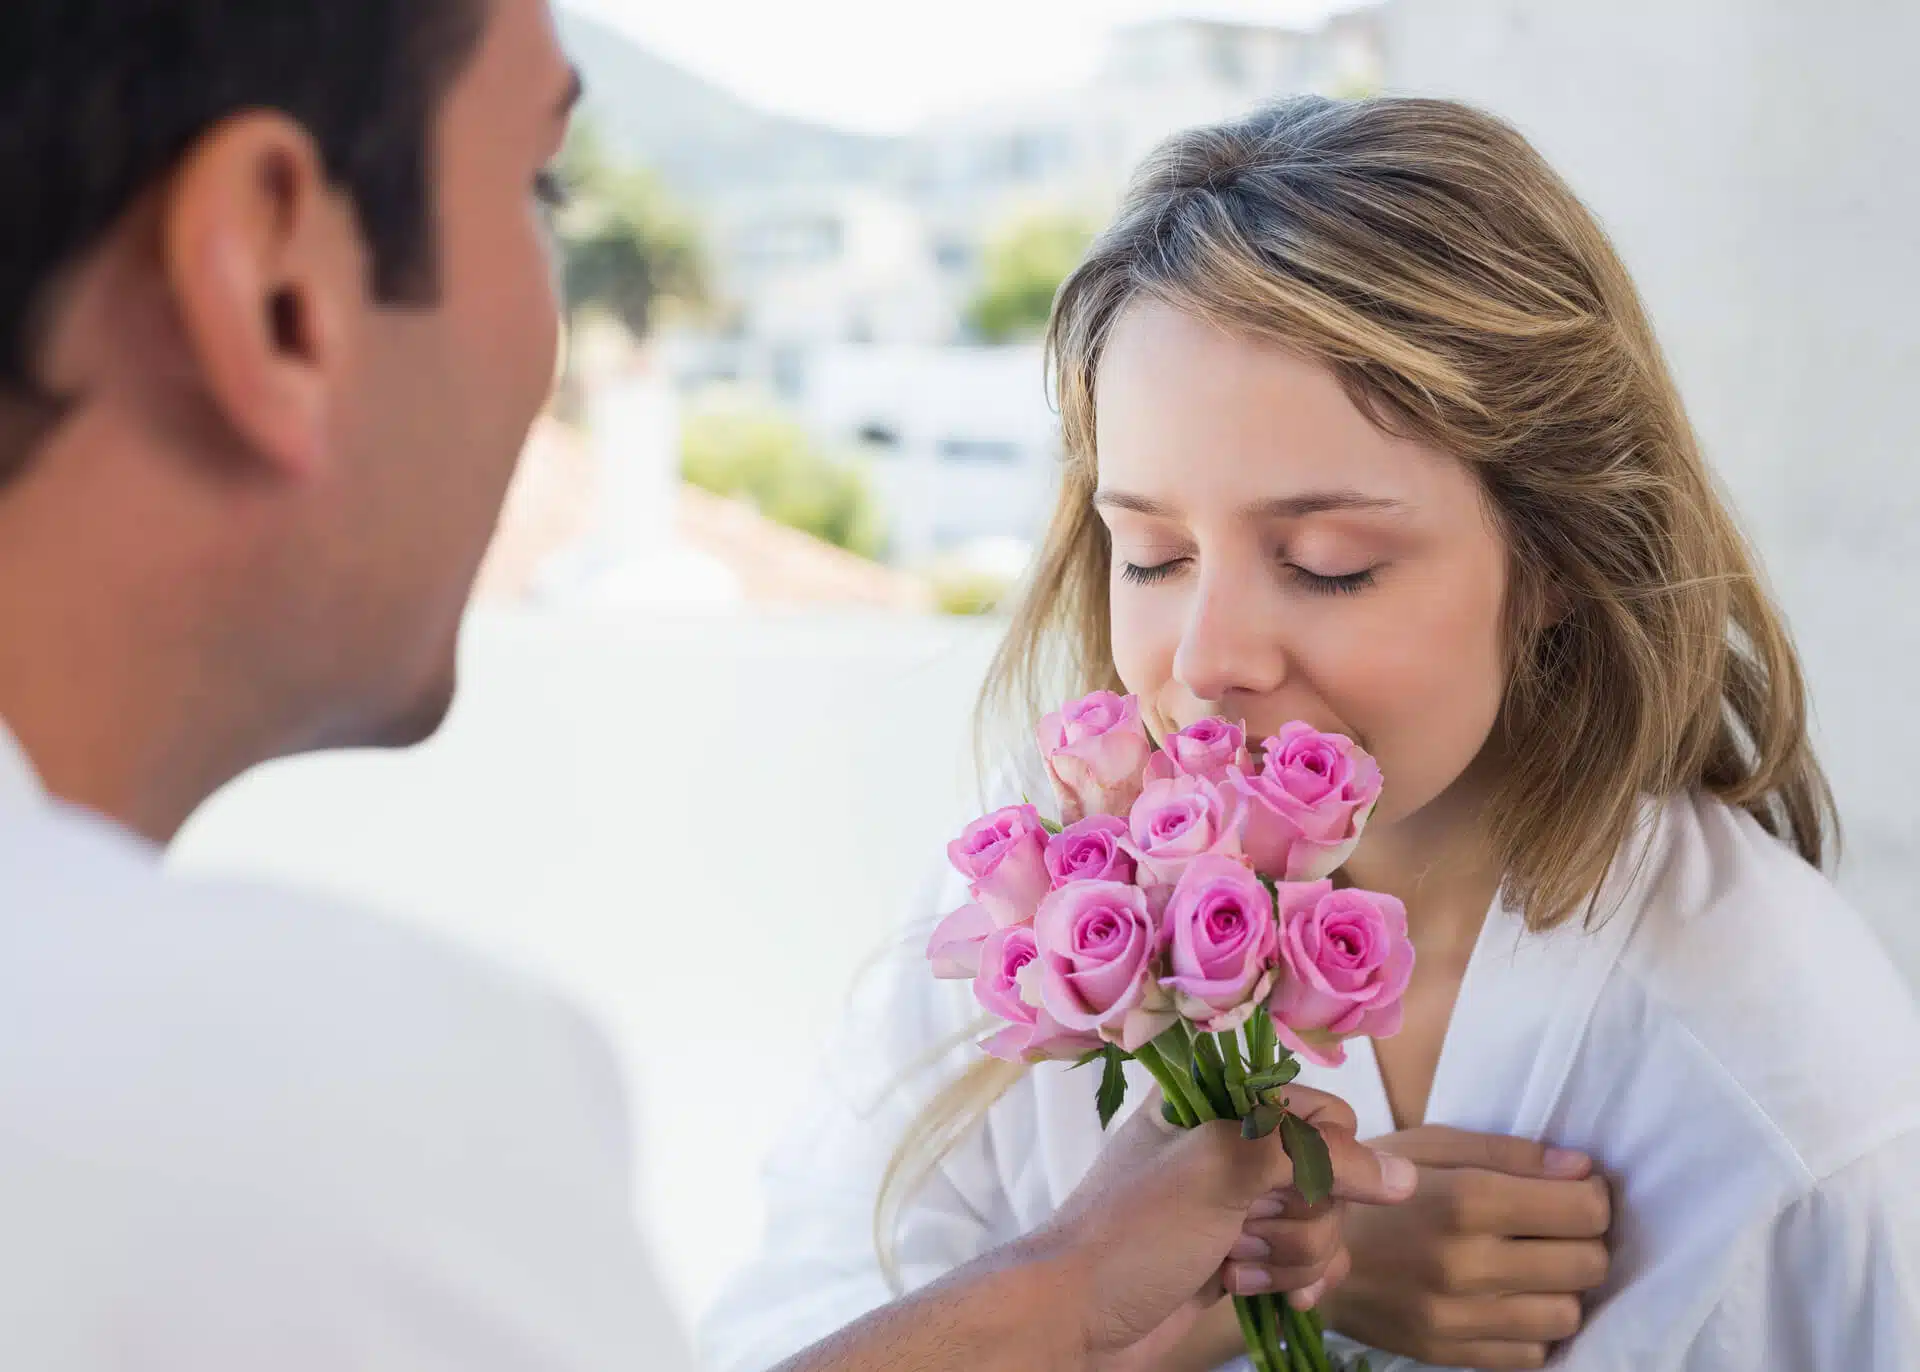 man giving flowers to a woman